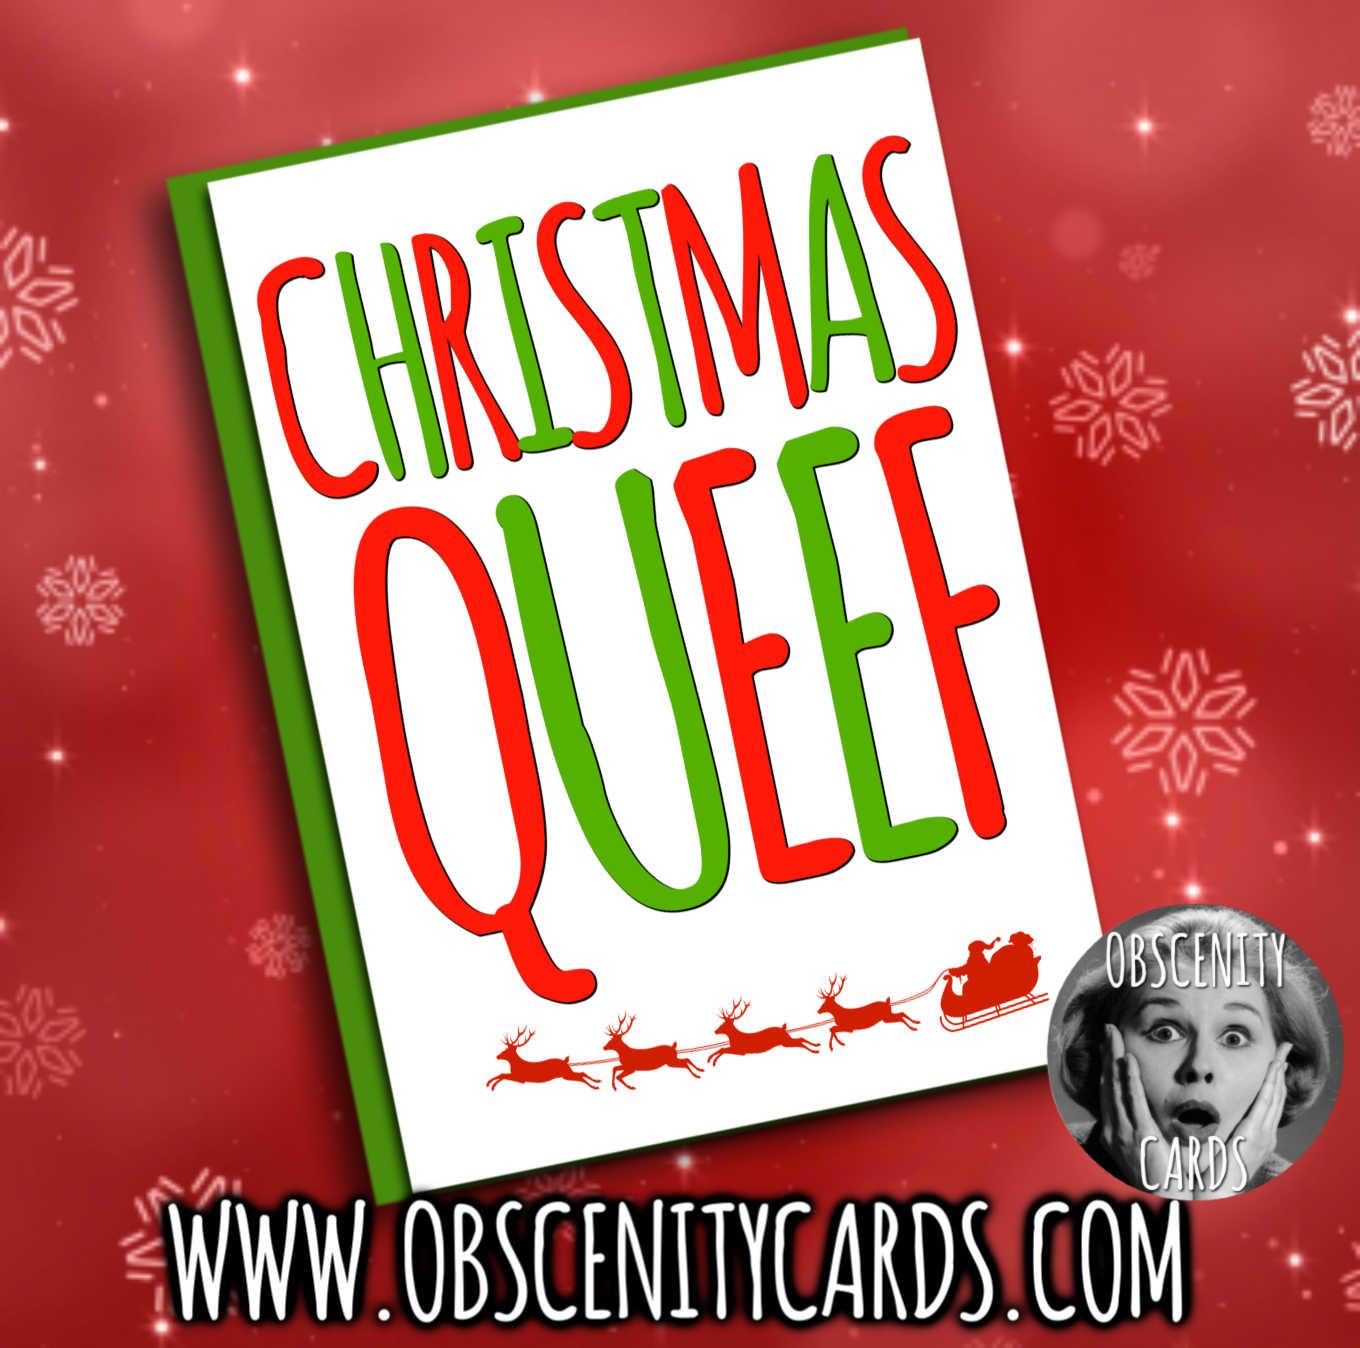 CHRISTMAS QUEEF FUNNY CHRISTMAS CARD